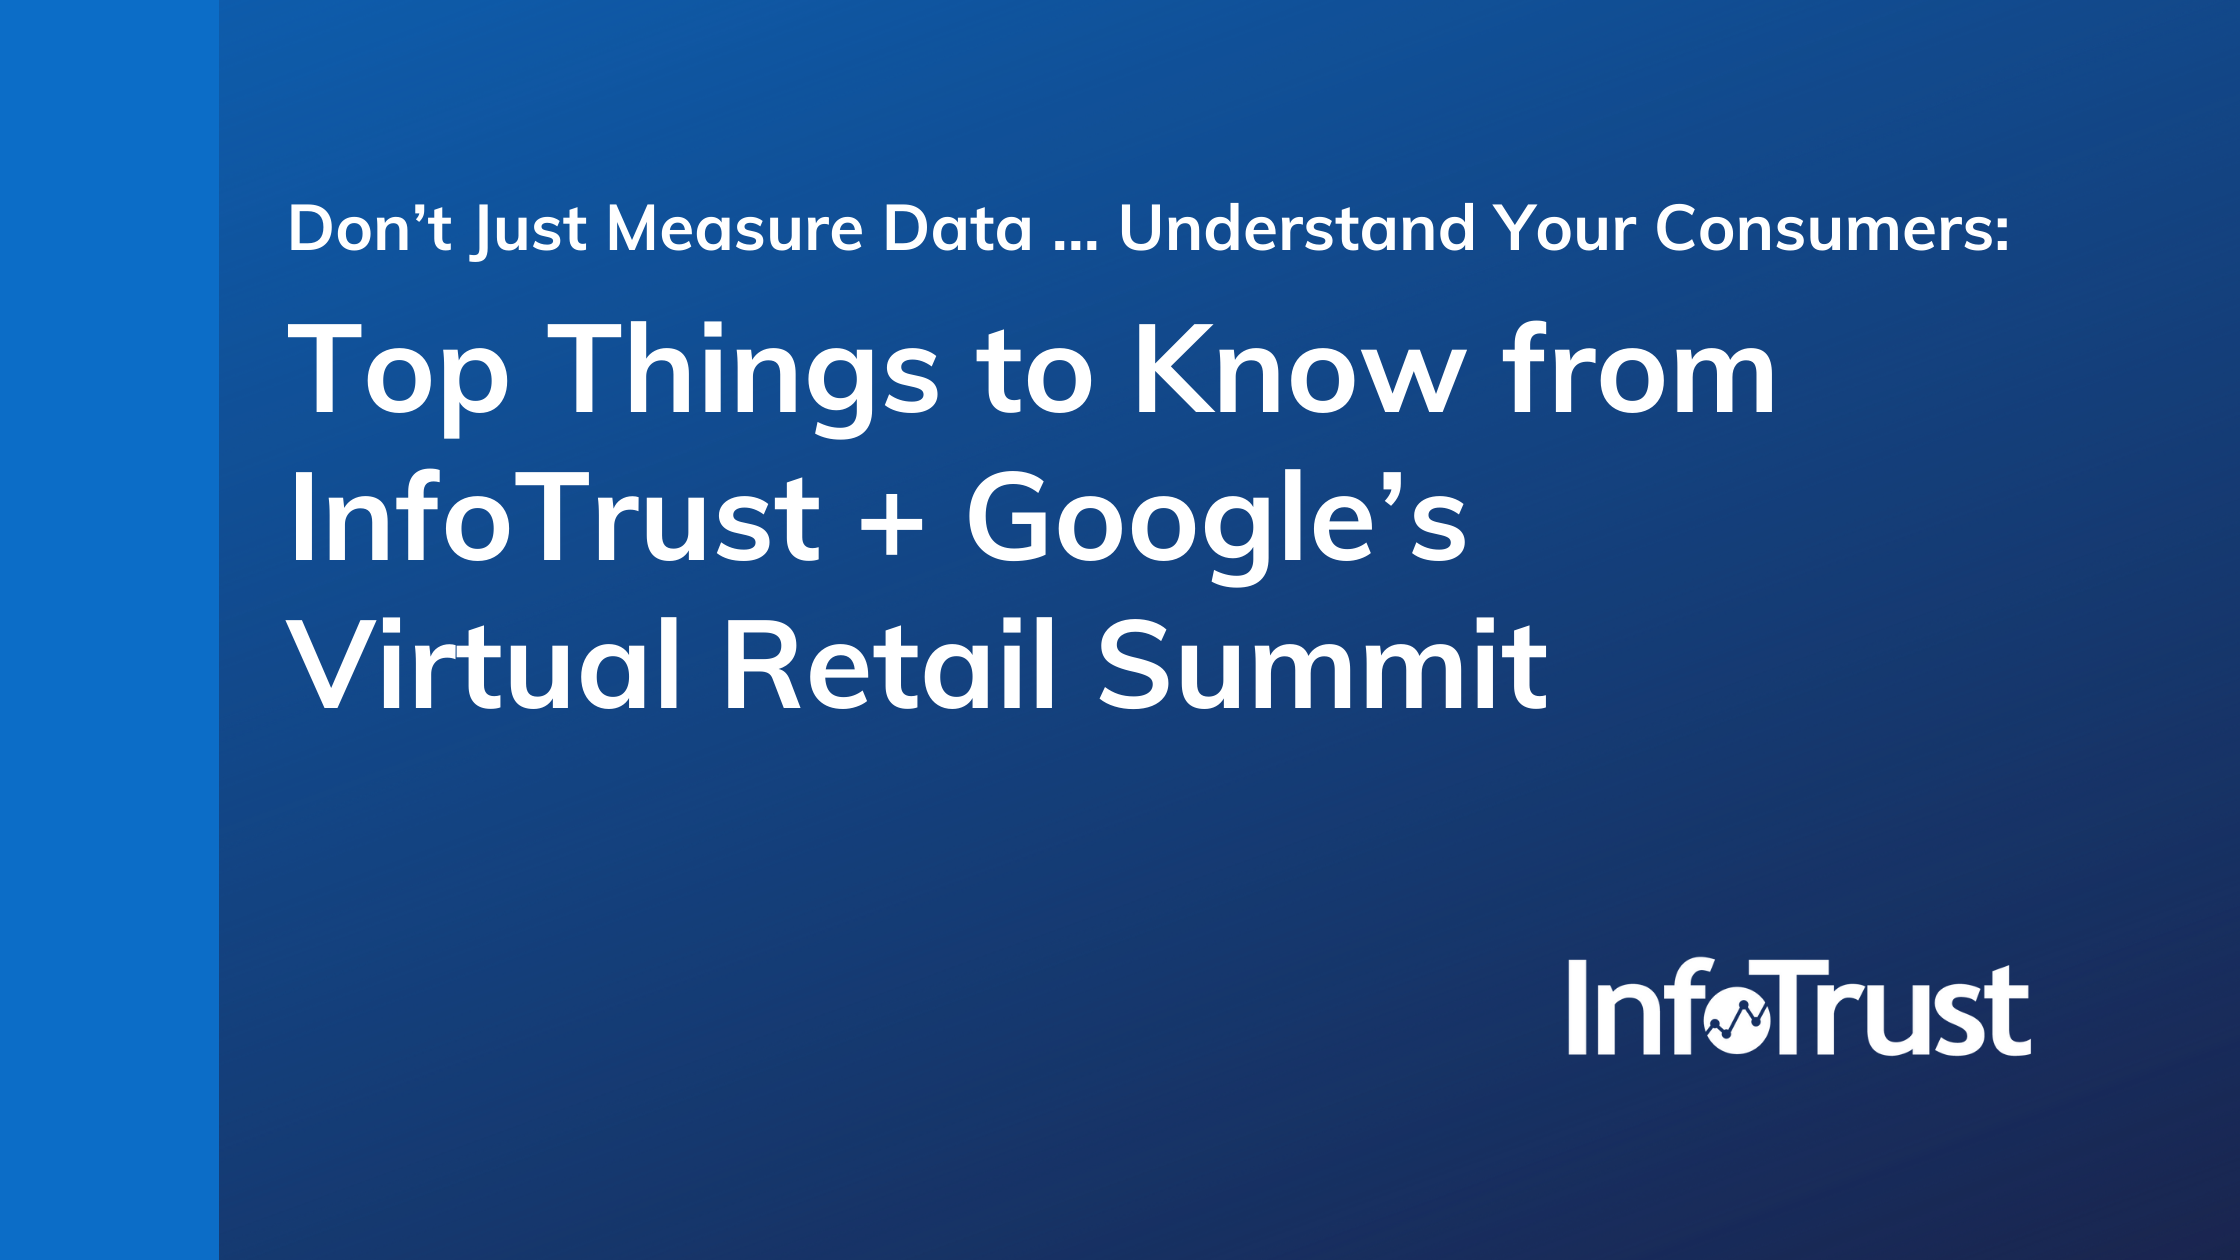 Don’t Just Measure Data … Understand Your Consumers: Top Things to Know from InfoTrust + Google’s Virtual Retail Summit